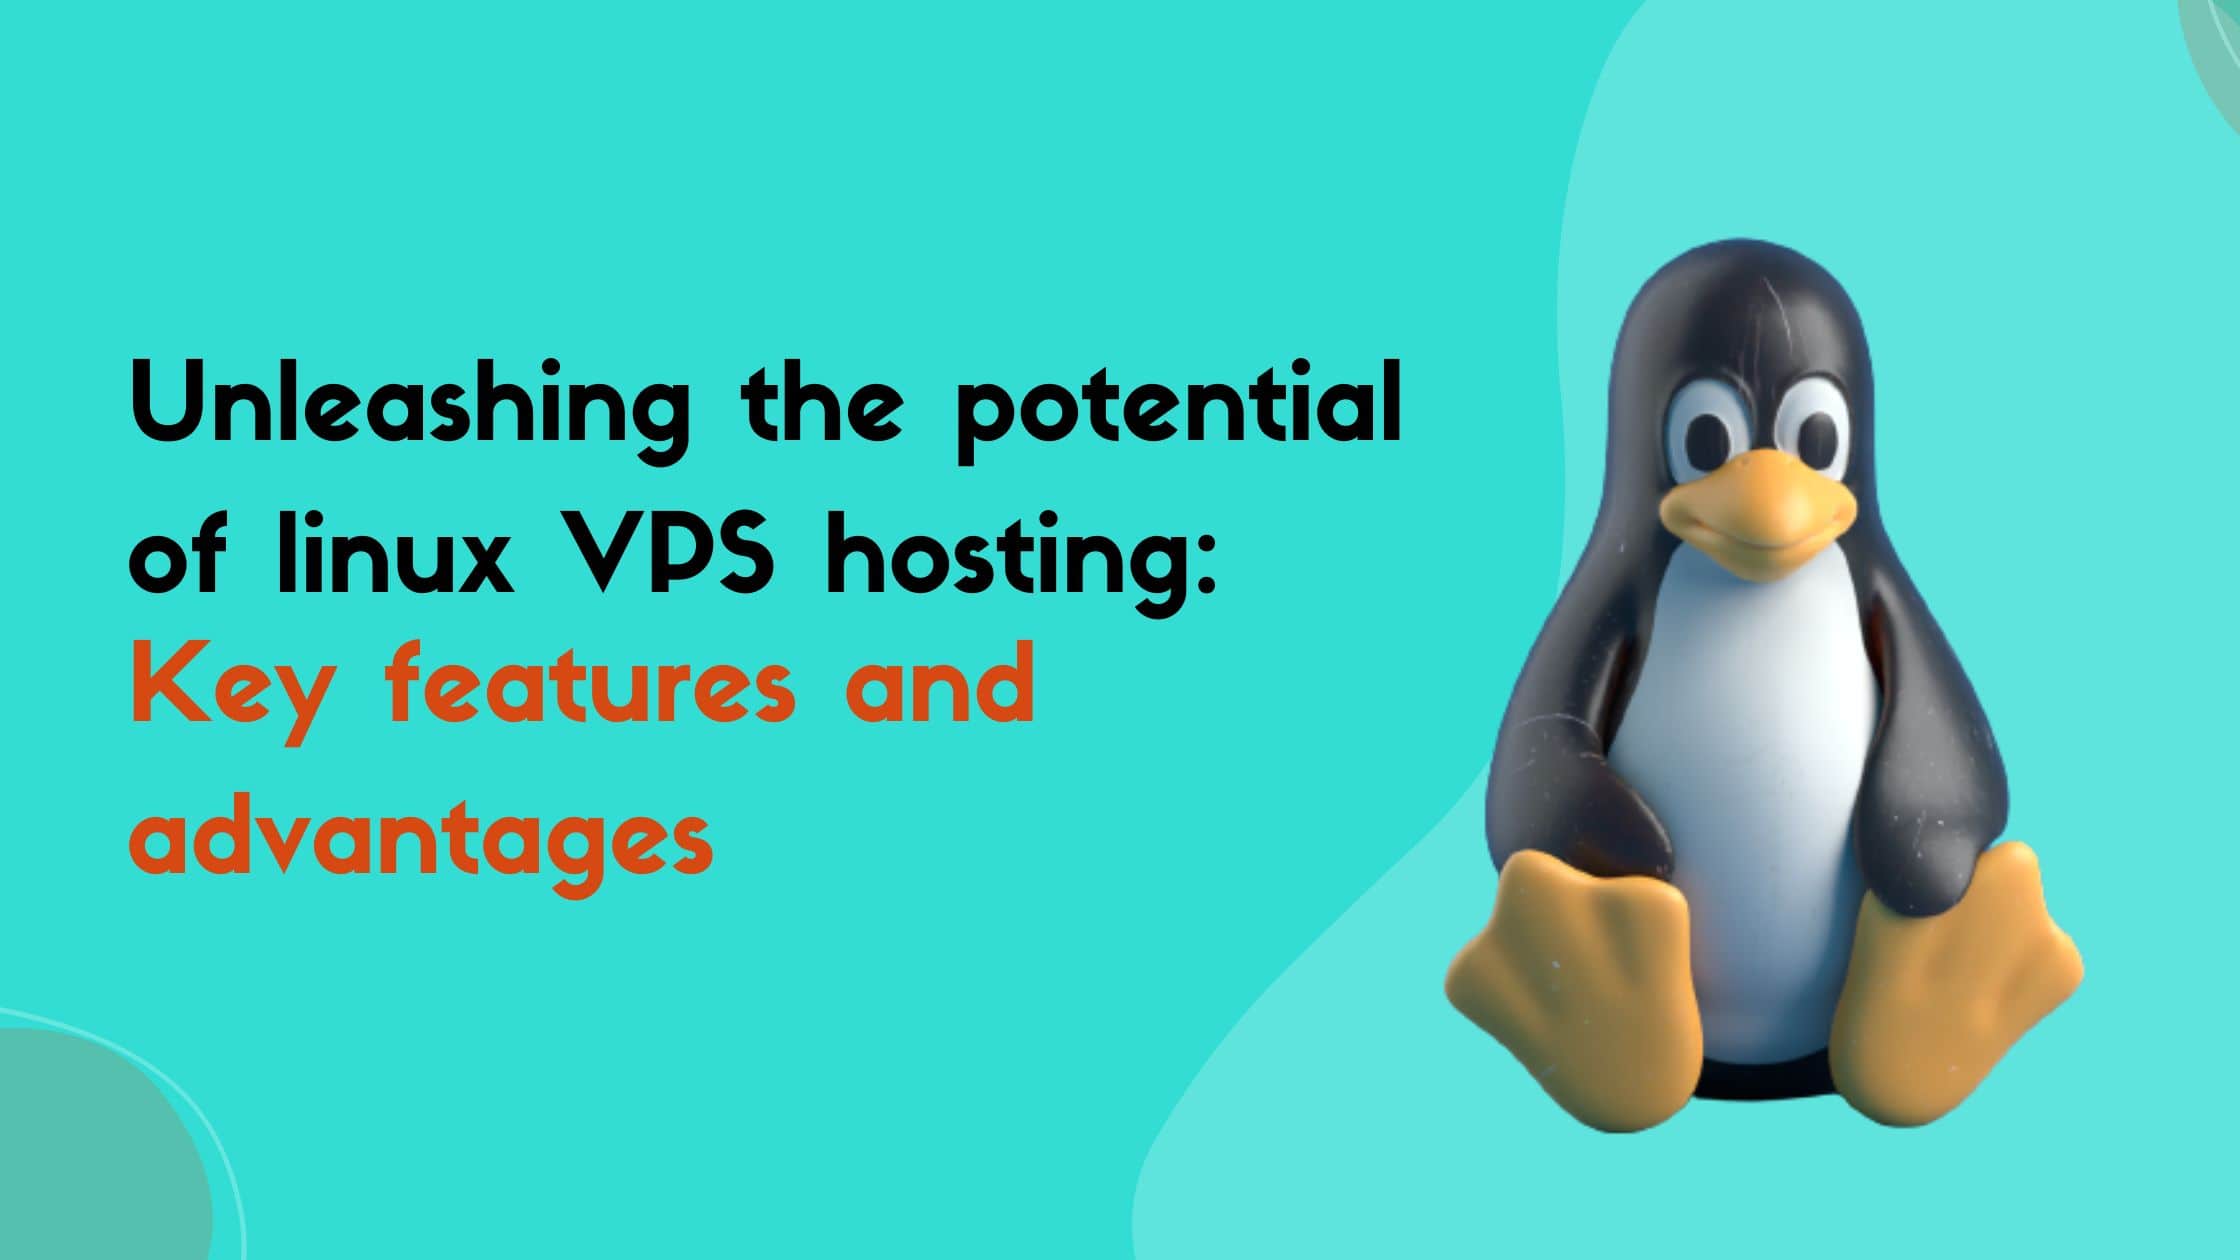 Unleashing the potential of Linux VPS hosting: Key features and advantages